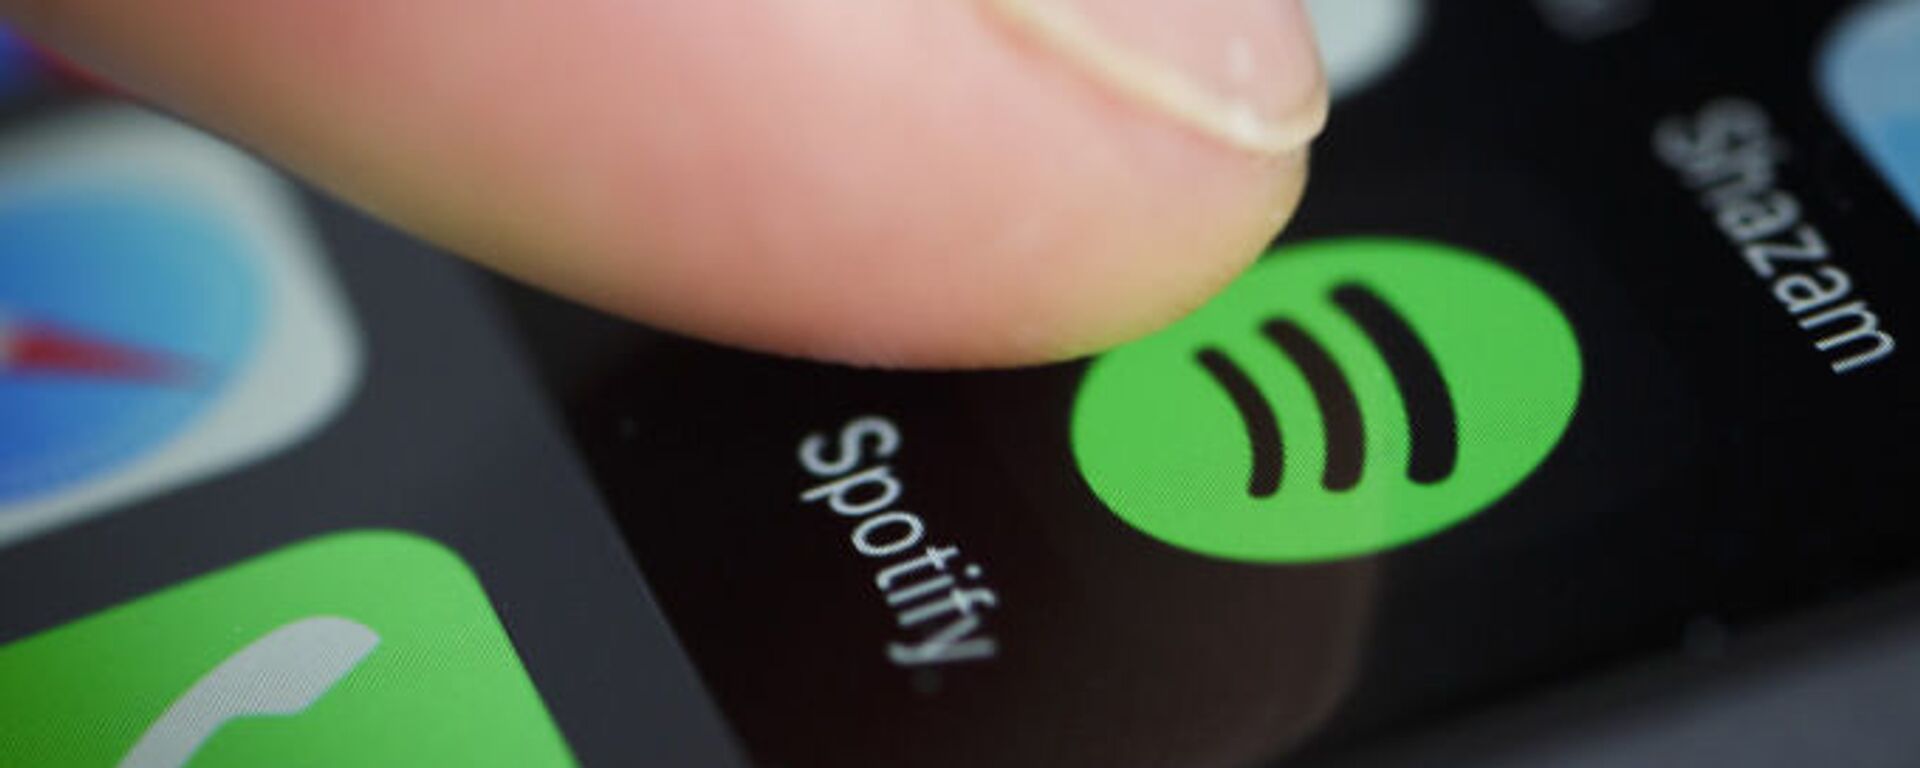 The Logo of streeming service Spotify is displayed on the screen of a smartphone on January 21, 2016 in Berlin, Germany - Sputnik International, 1920, 28.01.2022